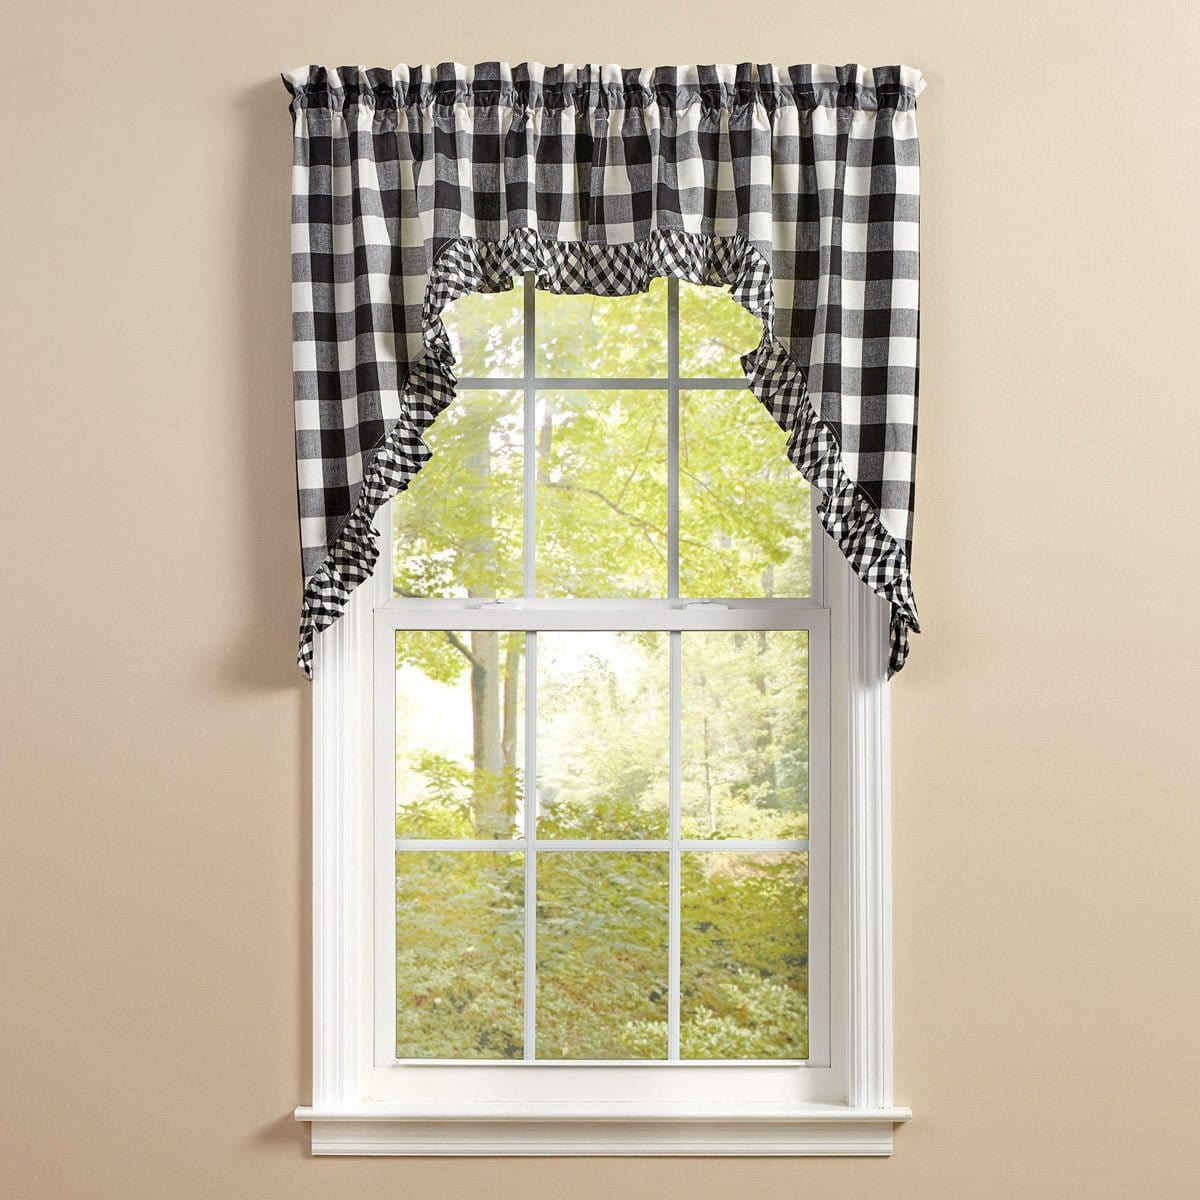 Wicklow Check in Black & Cream Ruffled Swag Pair 36" Long Unlined-Park Designs-The Village Merchant